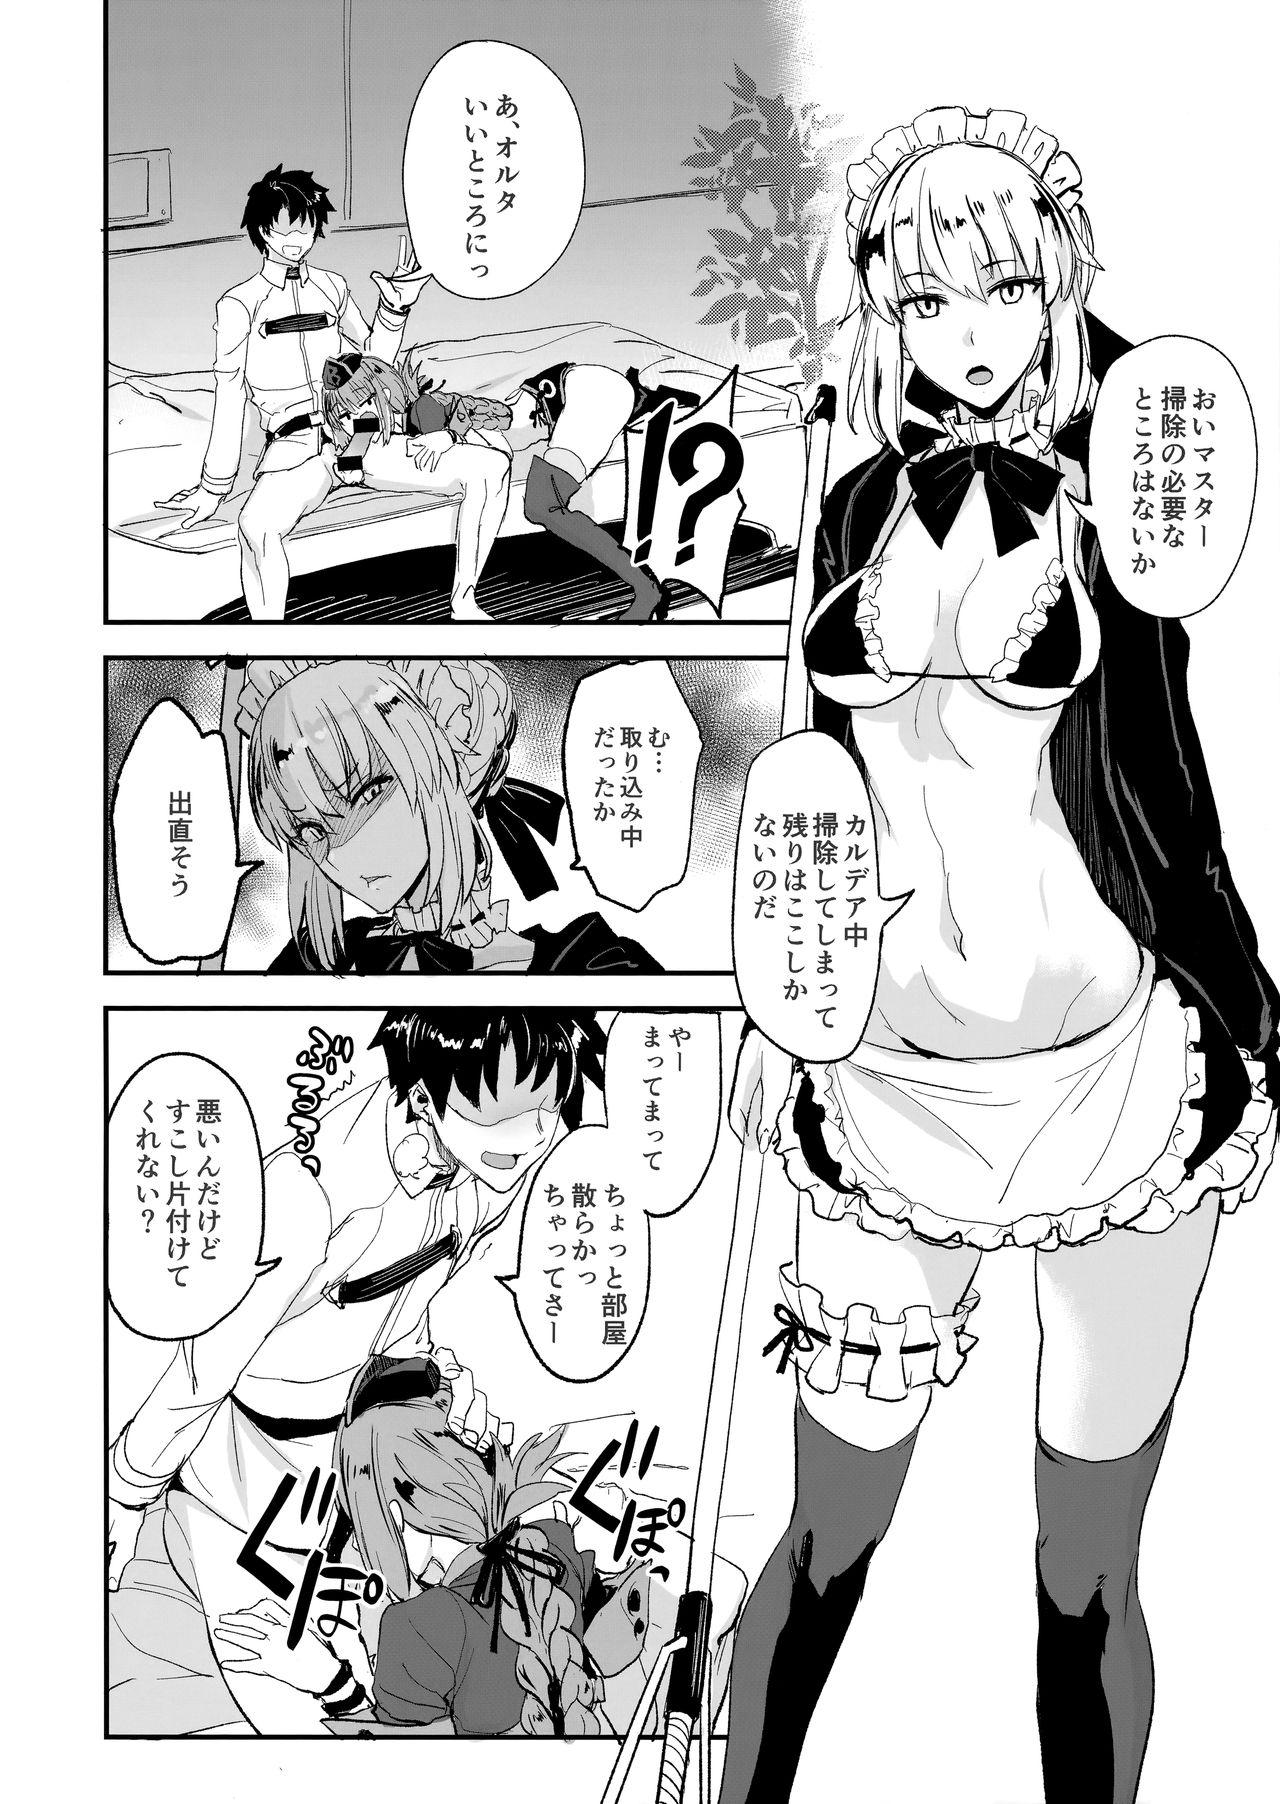 Eng Sub FGO no Erohon 2 - Fate grand order Ball Busting - Page 5